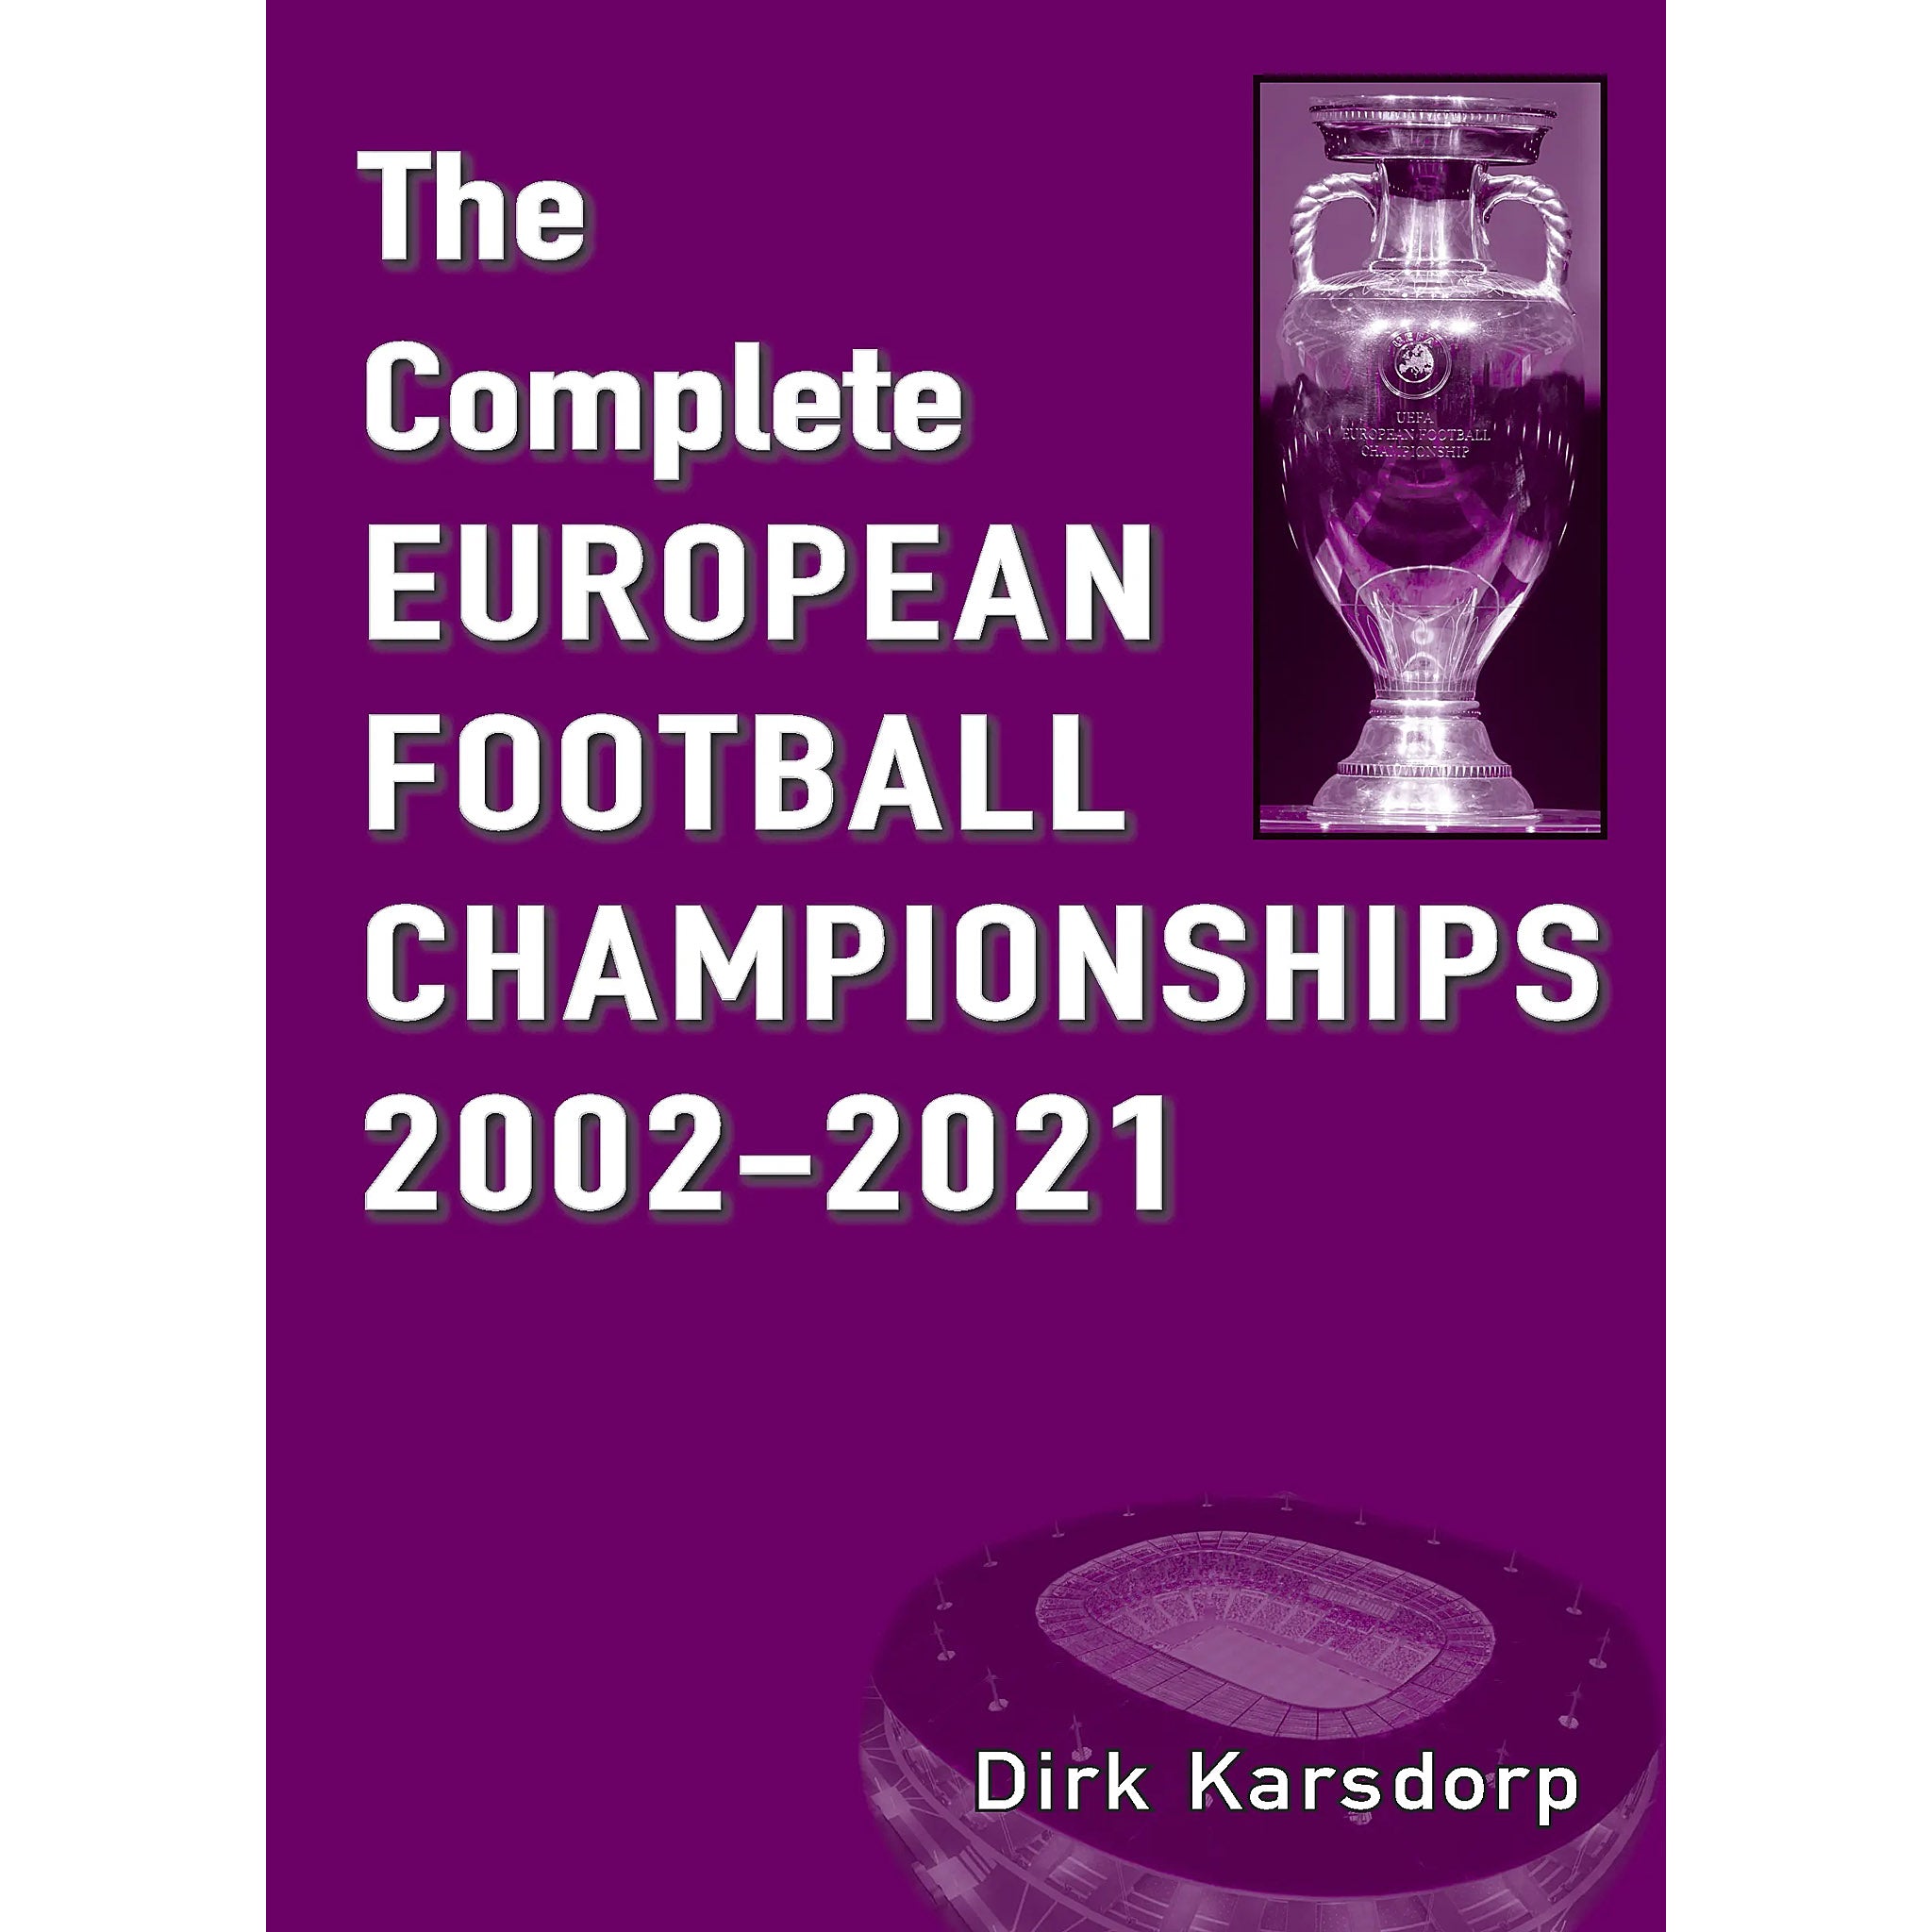 The Complete European Football Championships 2002-2021